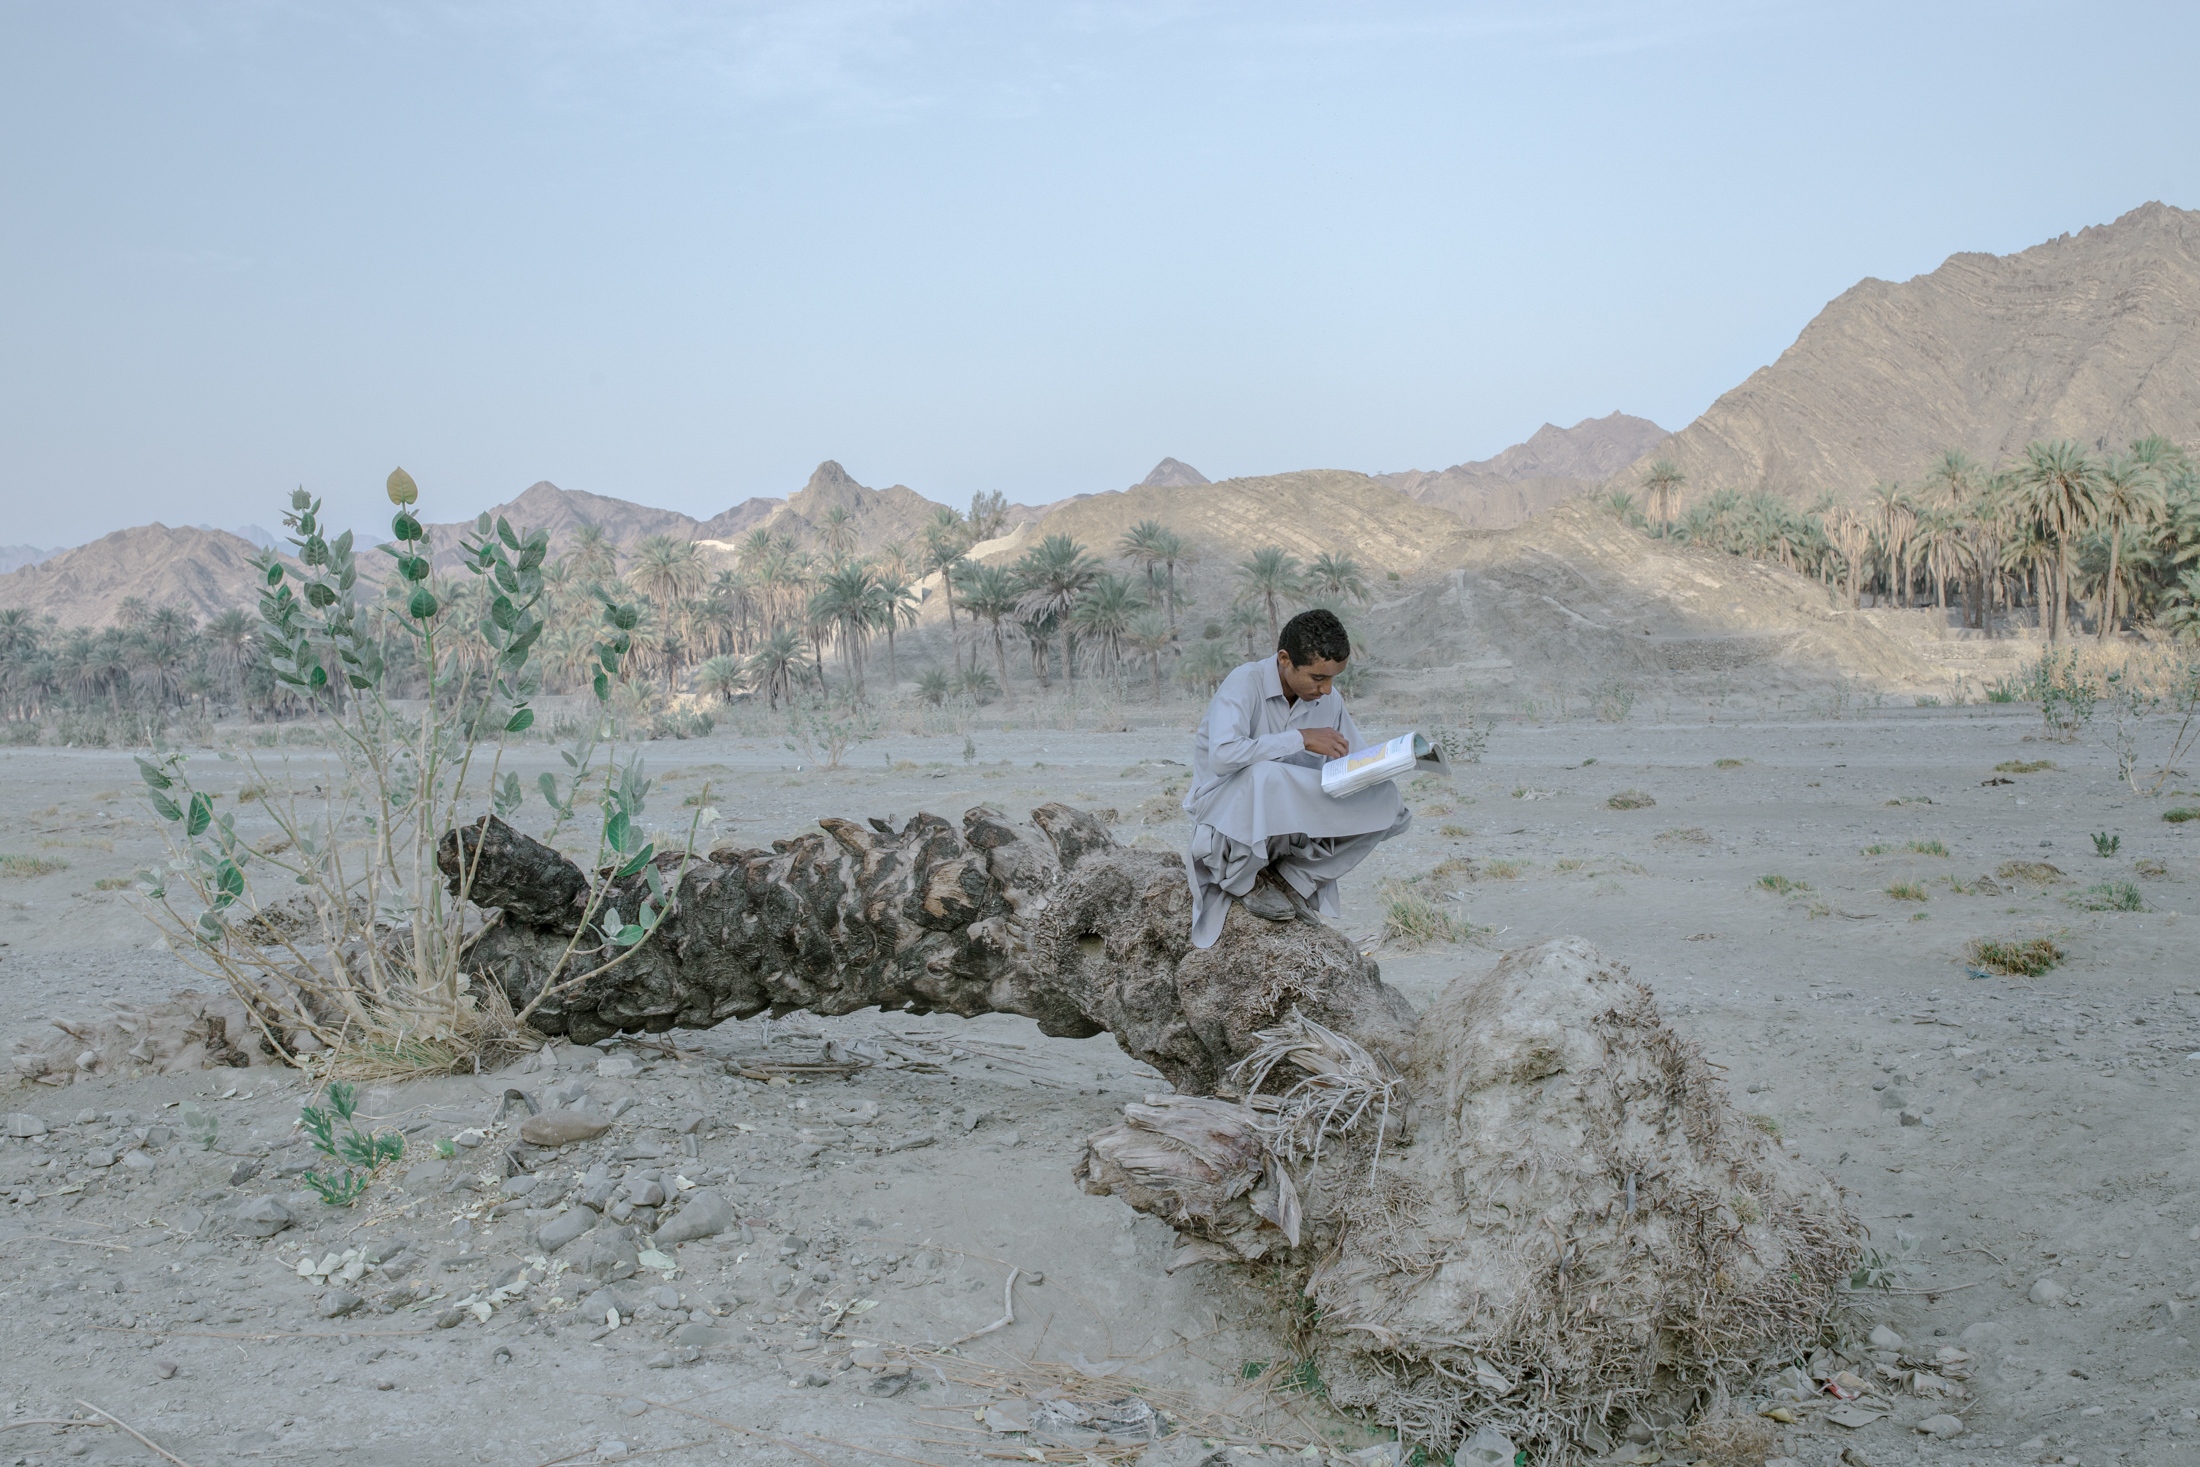 IN THE DESERT OF WETLANDS -   Miran, 17, is studying on the shoulder of the dirt road...